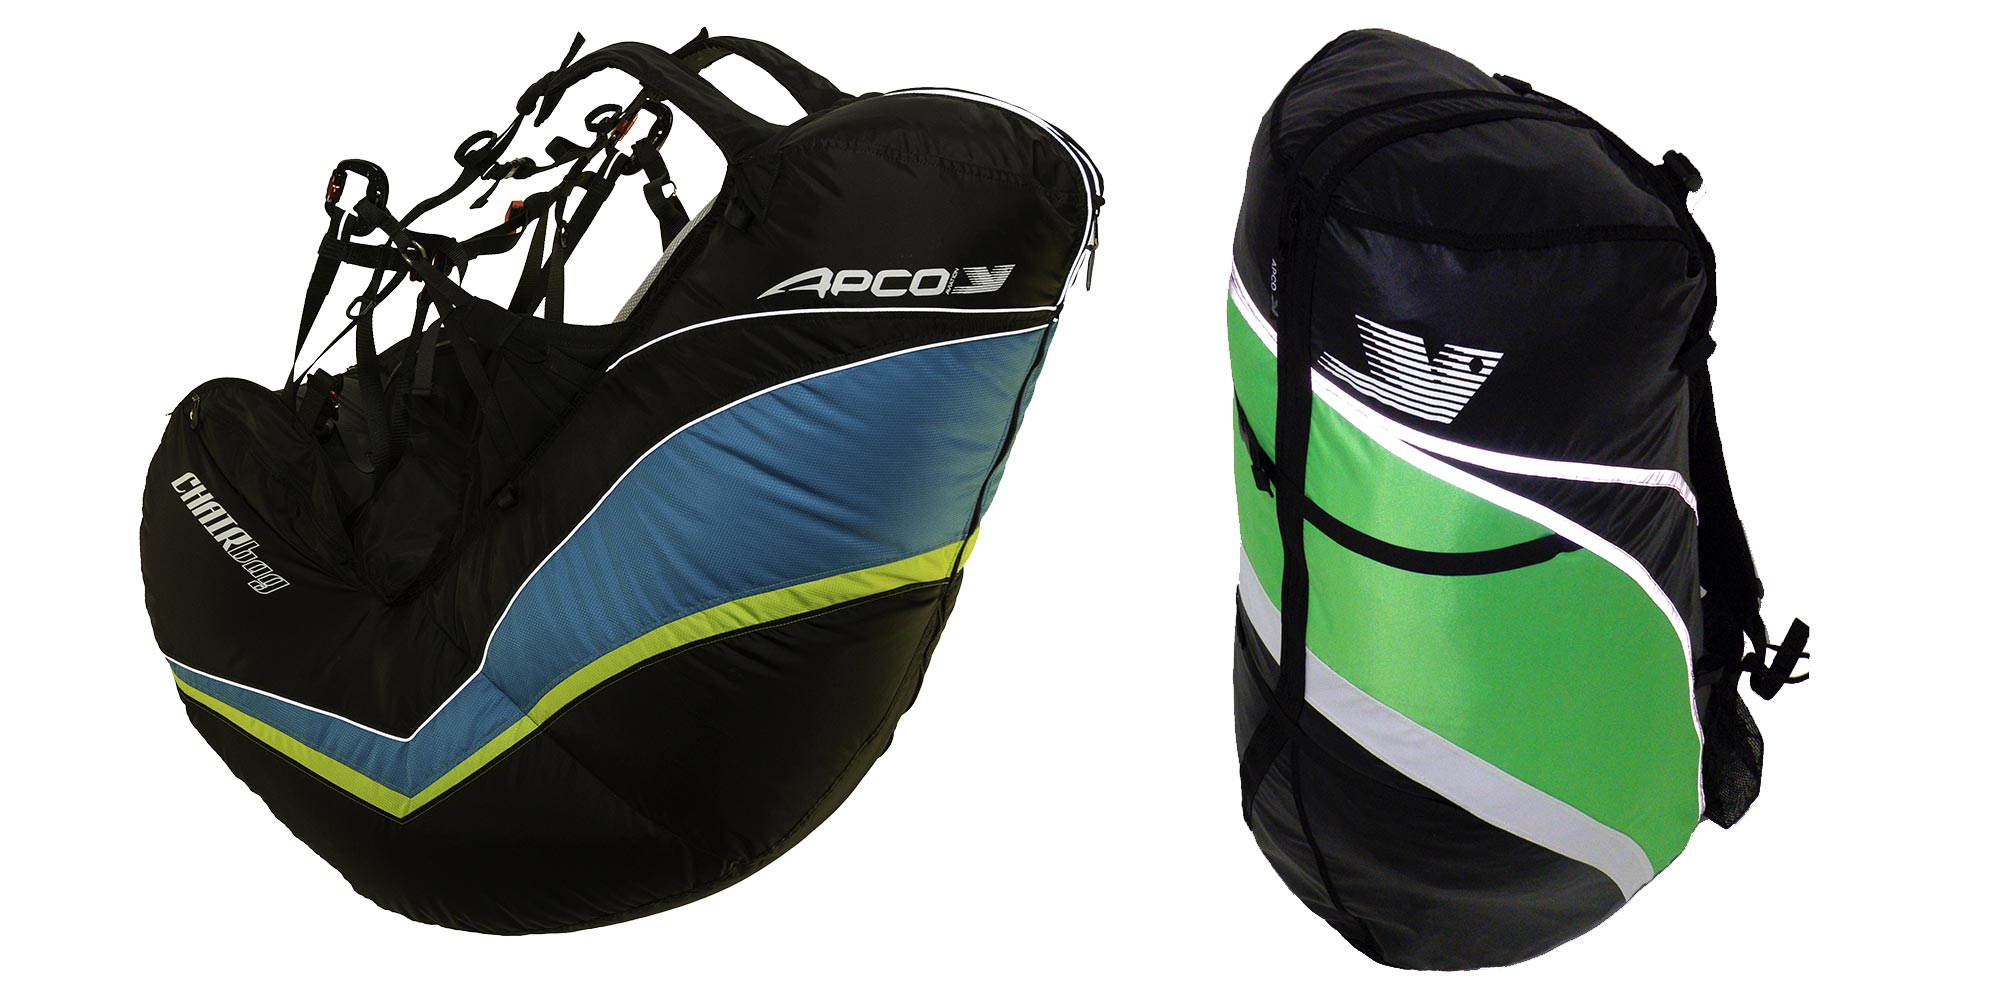 Apco's Chairbag V reversible harness | Cross Country Magazine – In 